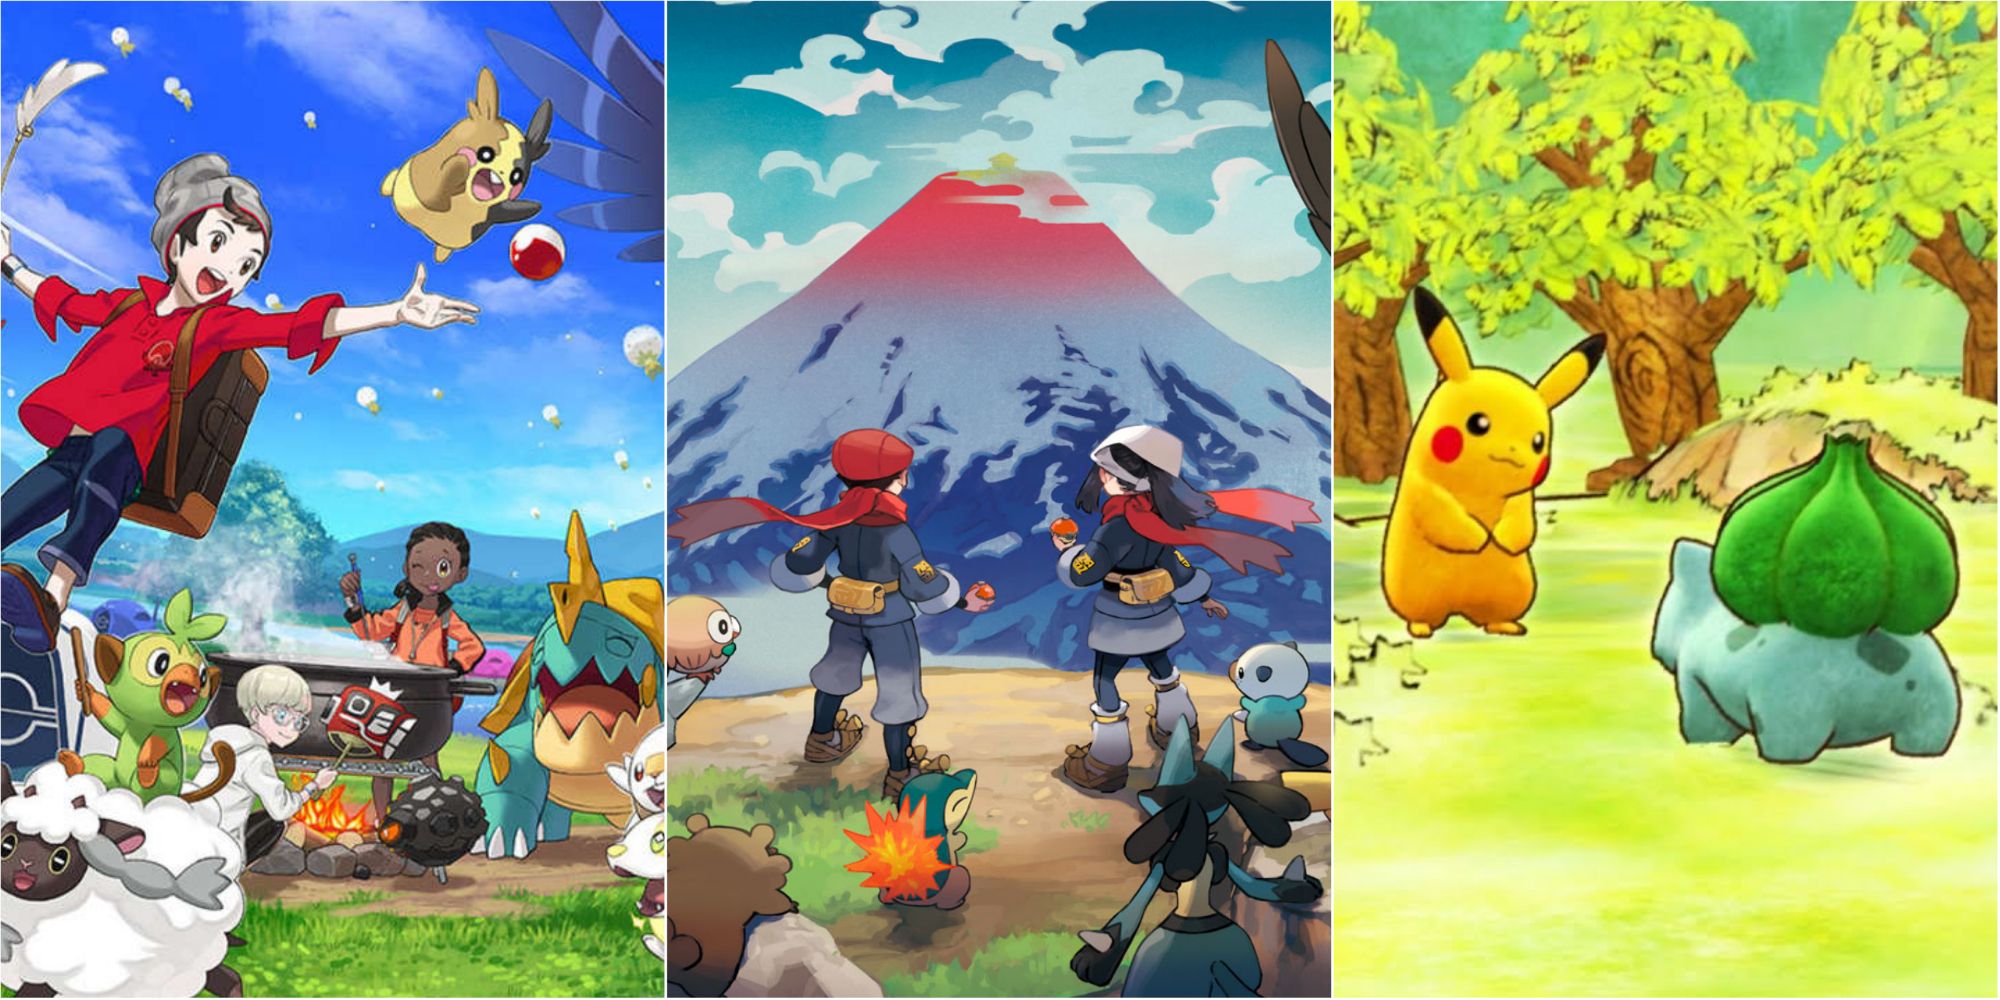 Split images of Pokemon Sword and Shield official art, Pokemon: Legends Arceus official art, and a screenshot if Pikachu and Bulbasaur from Pokemon Mystery Dungeon Rescue Team DX.